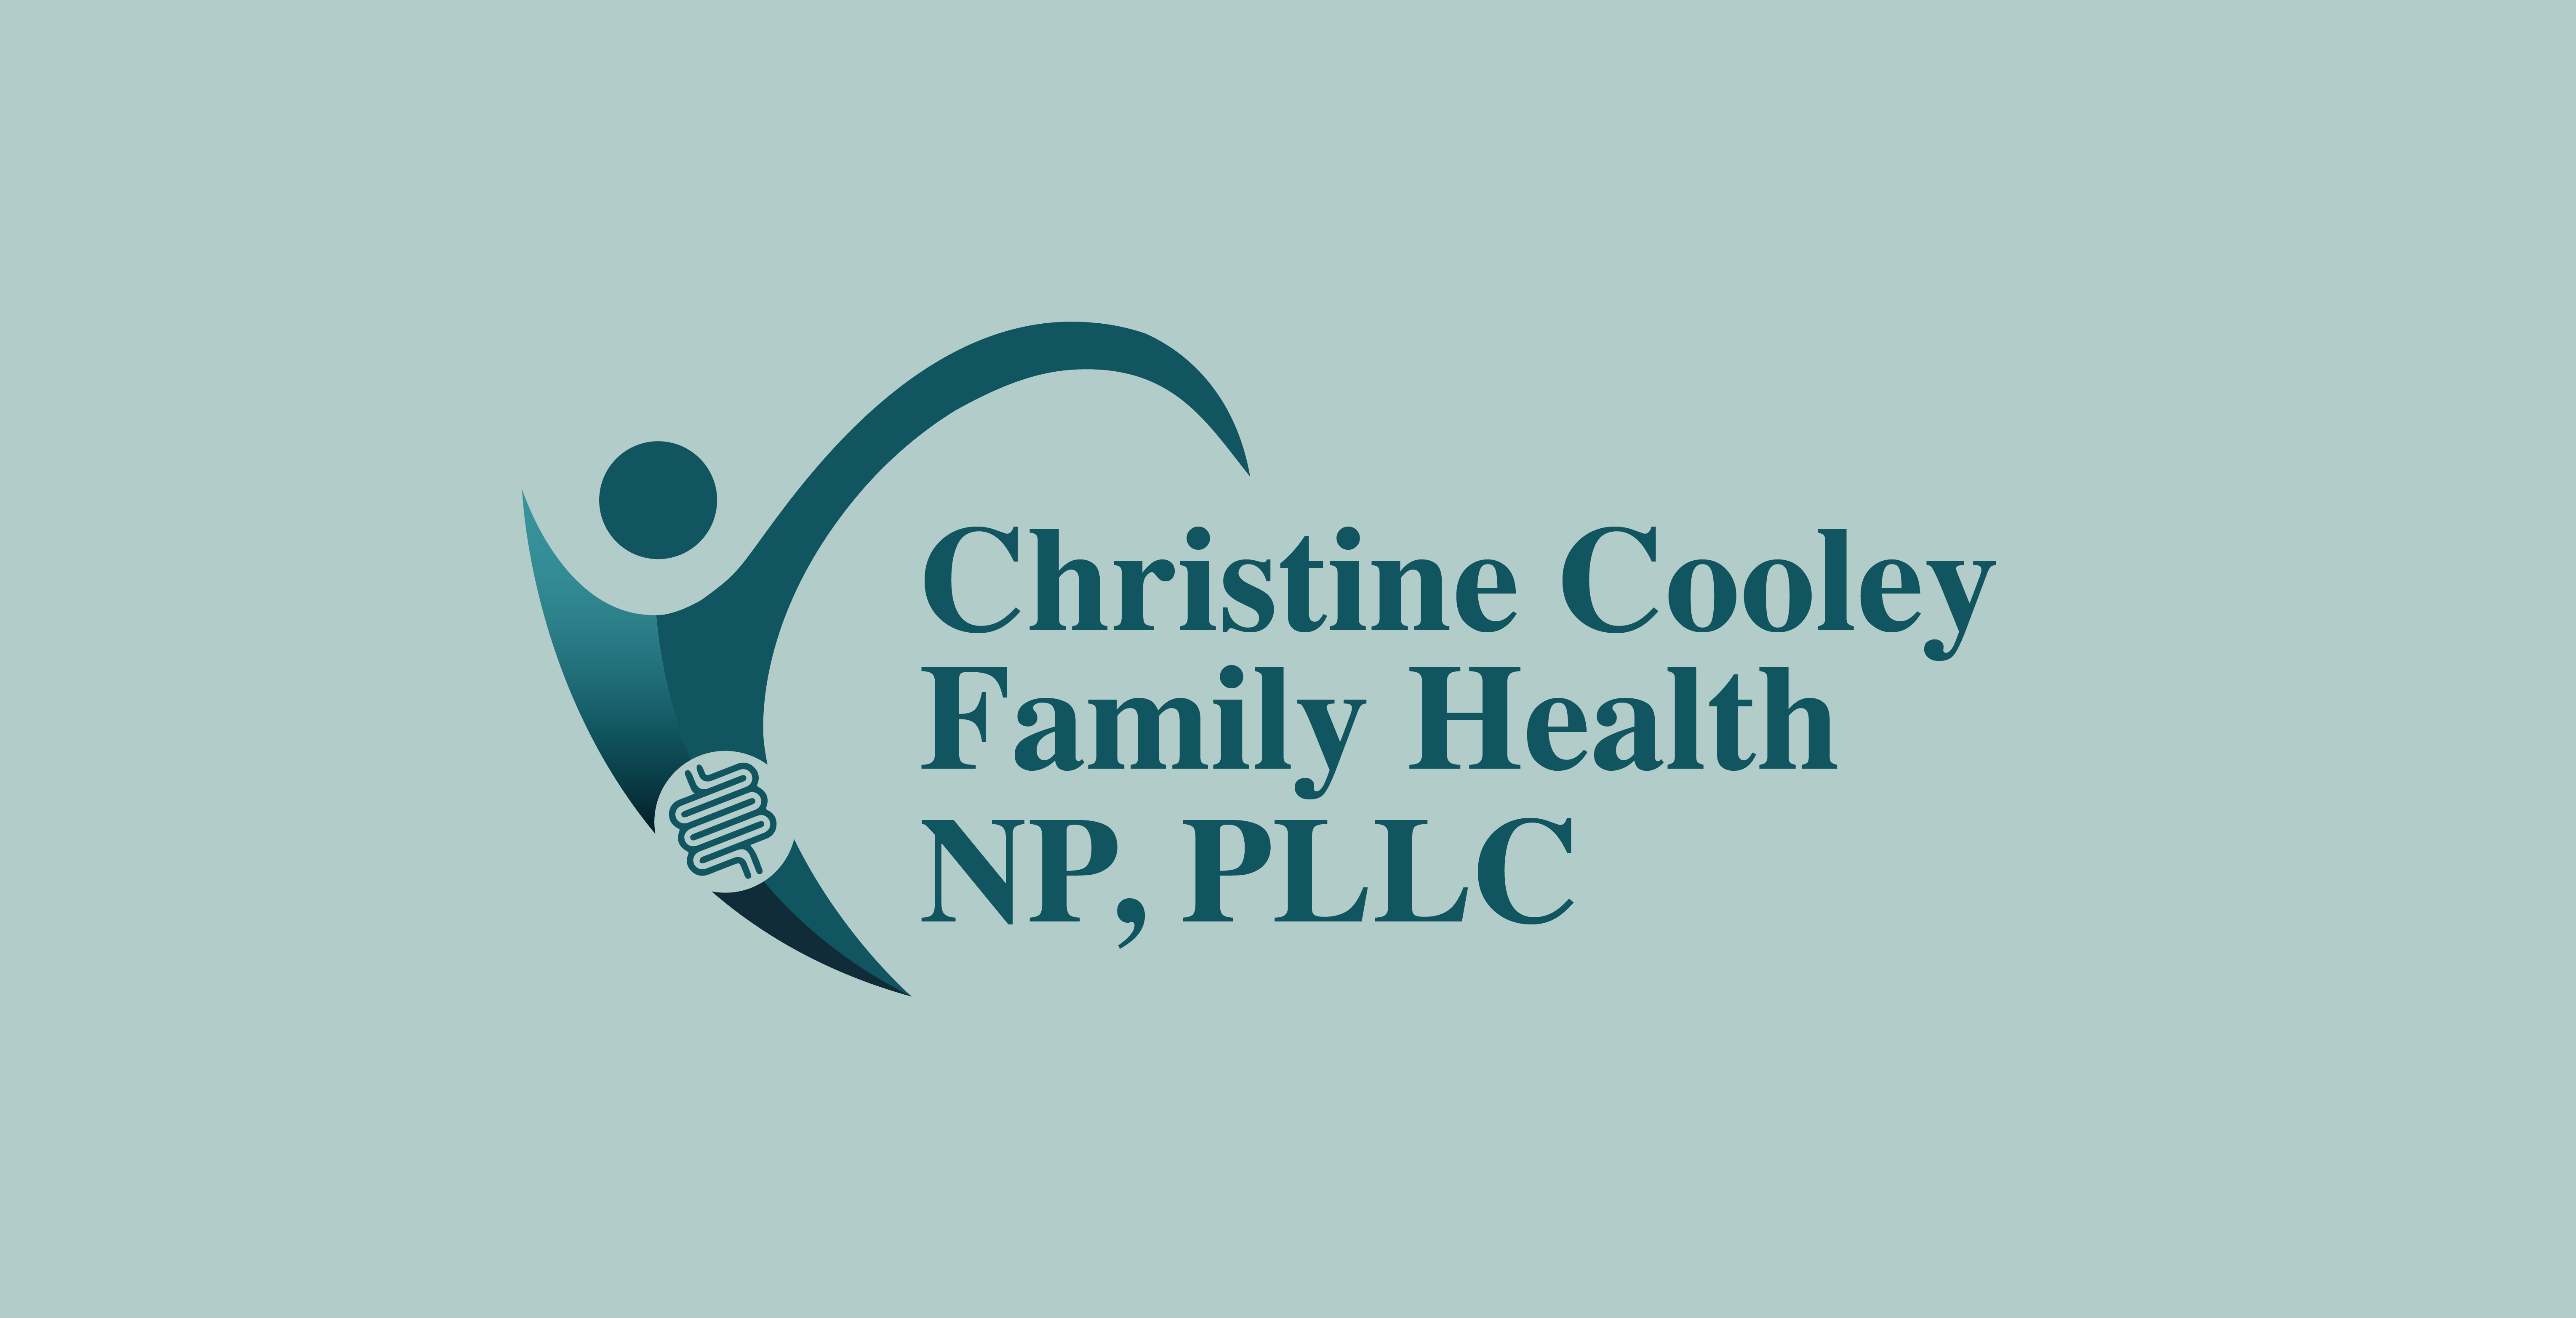 Christine Cooley Family Health 